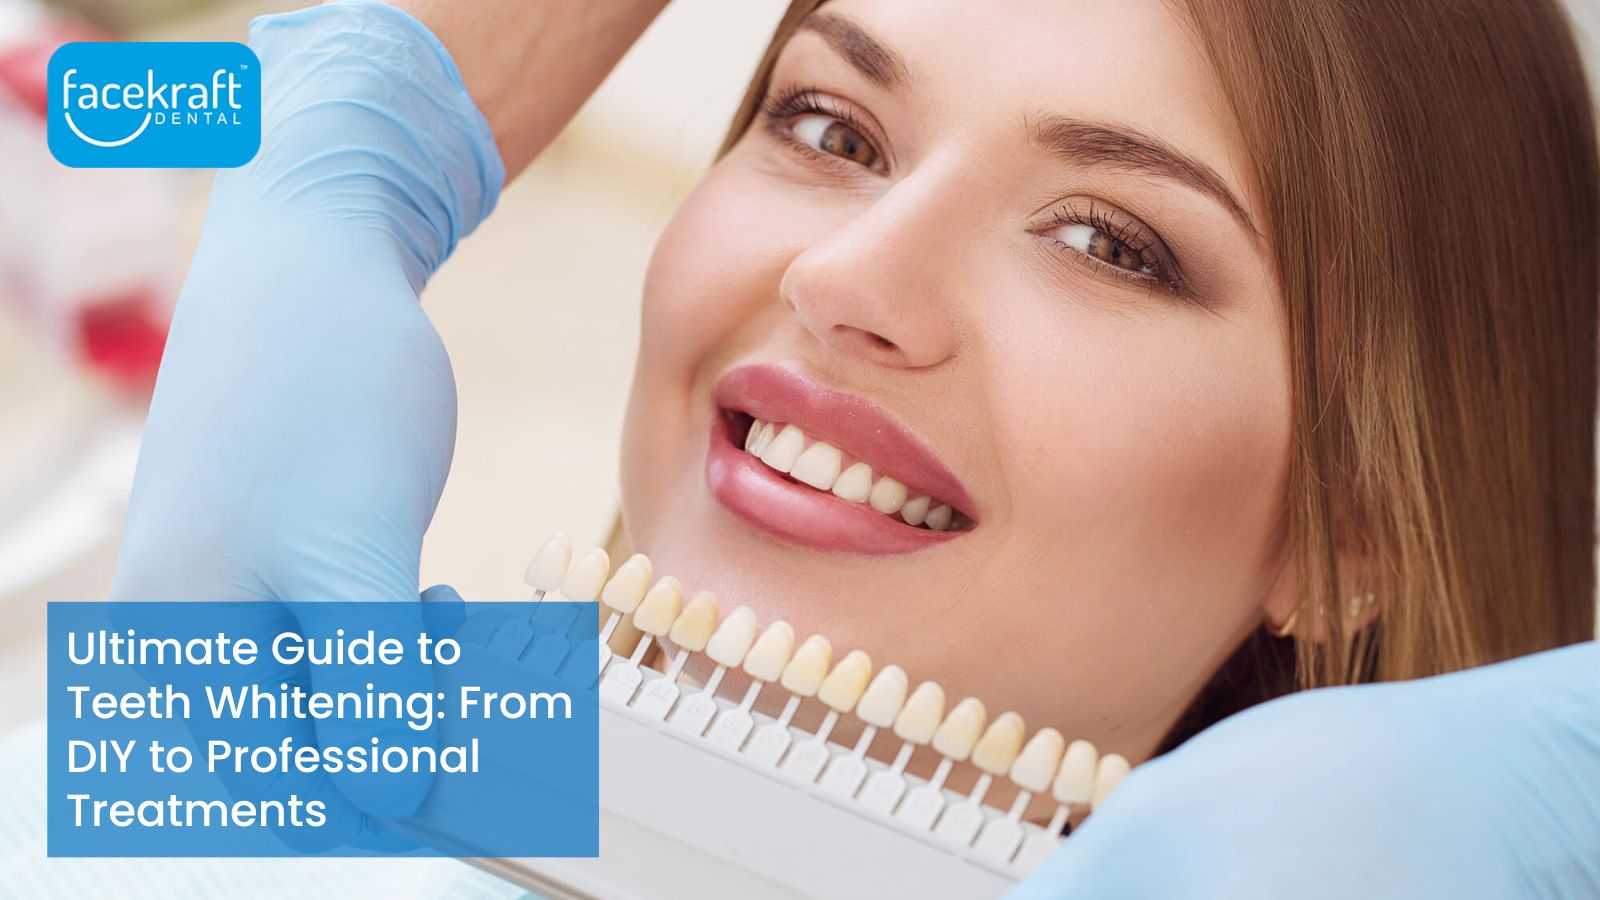 Ultimate Guide to Teeth Whitening: From DIY to Professional Treatments